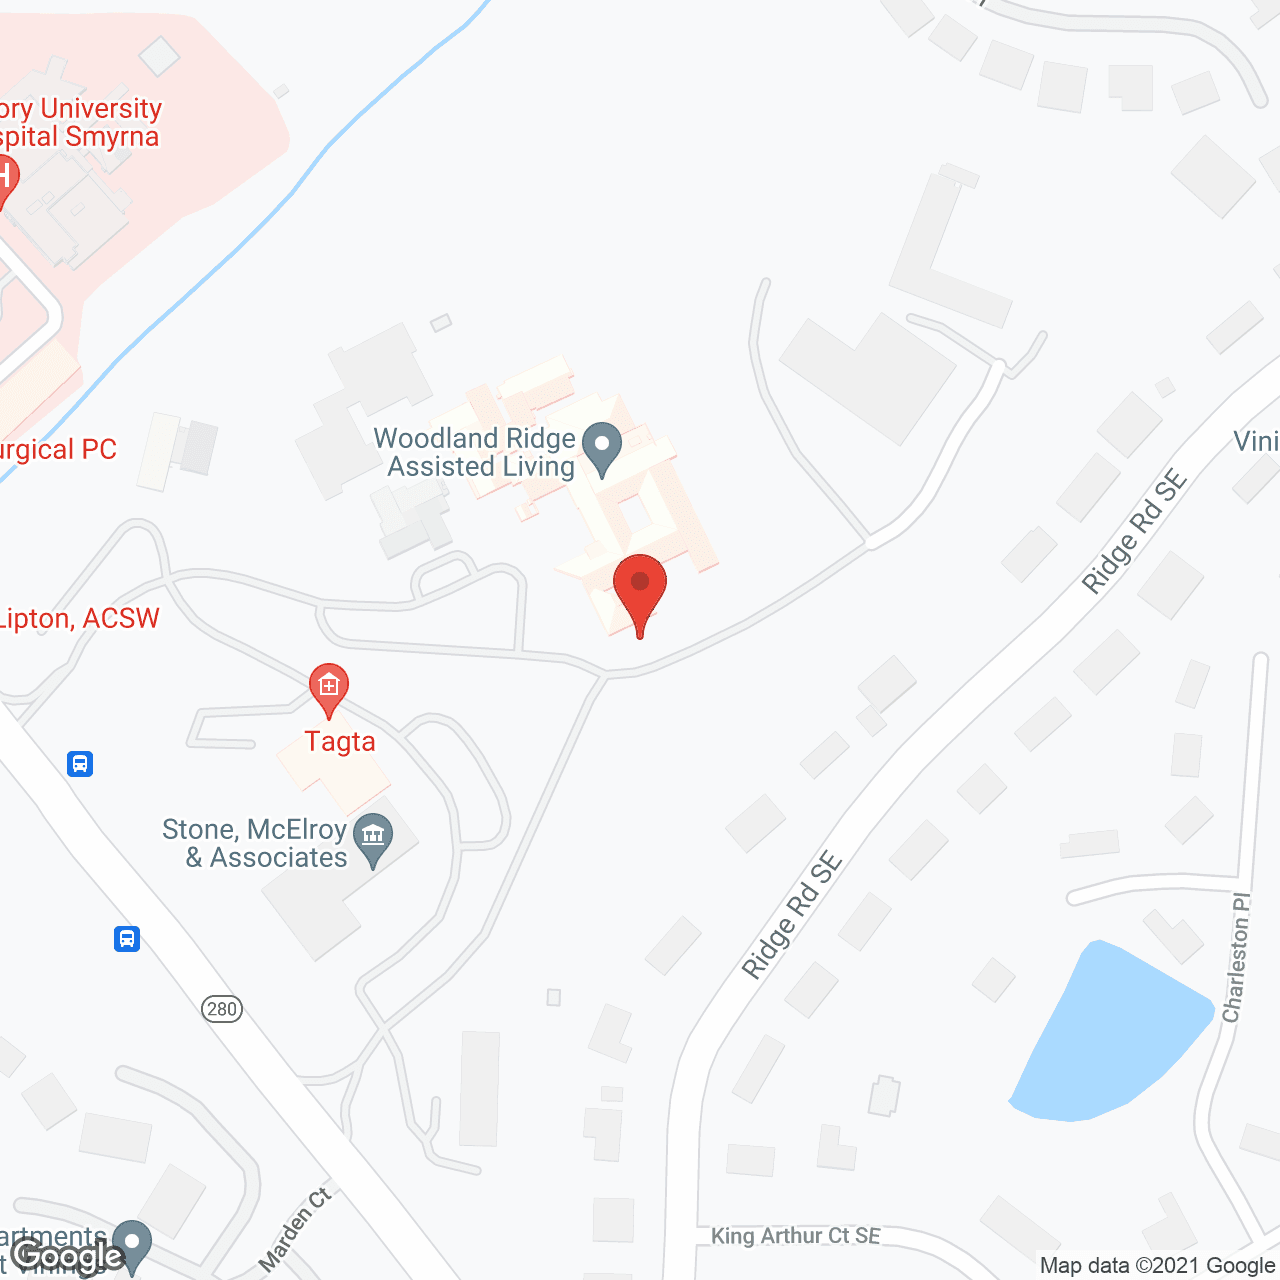 Woodland Ridge Assisted Living in google map